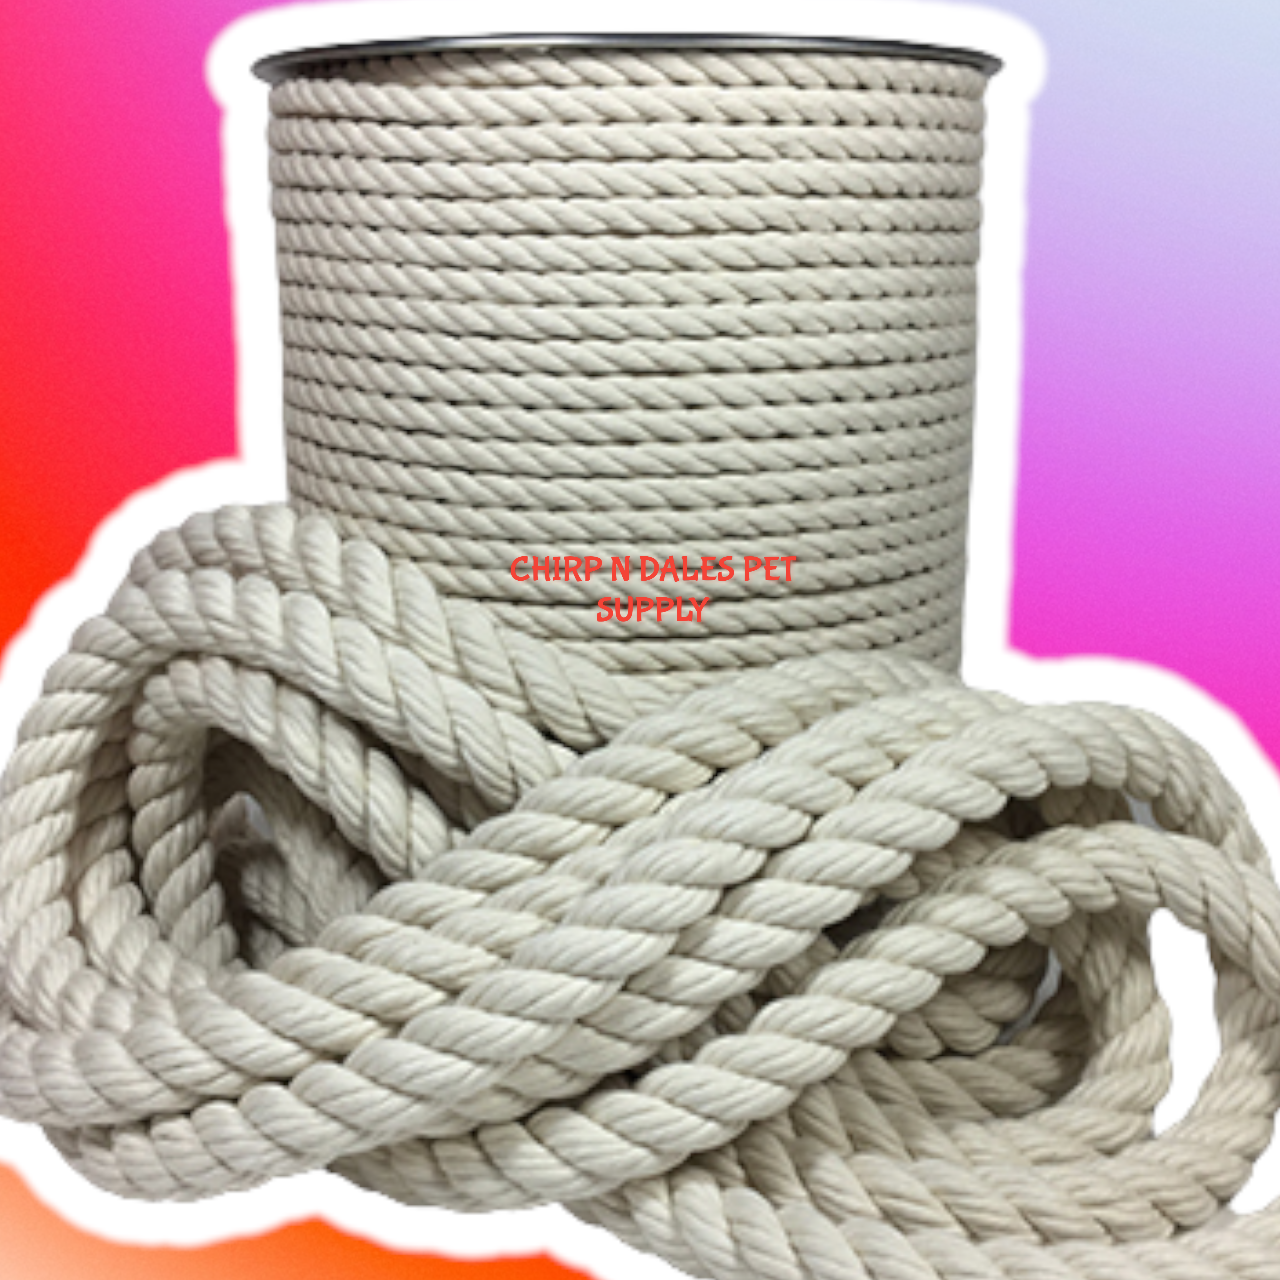 100% Cotton 3 Strand Rope 3/8'' (per foot)